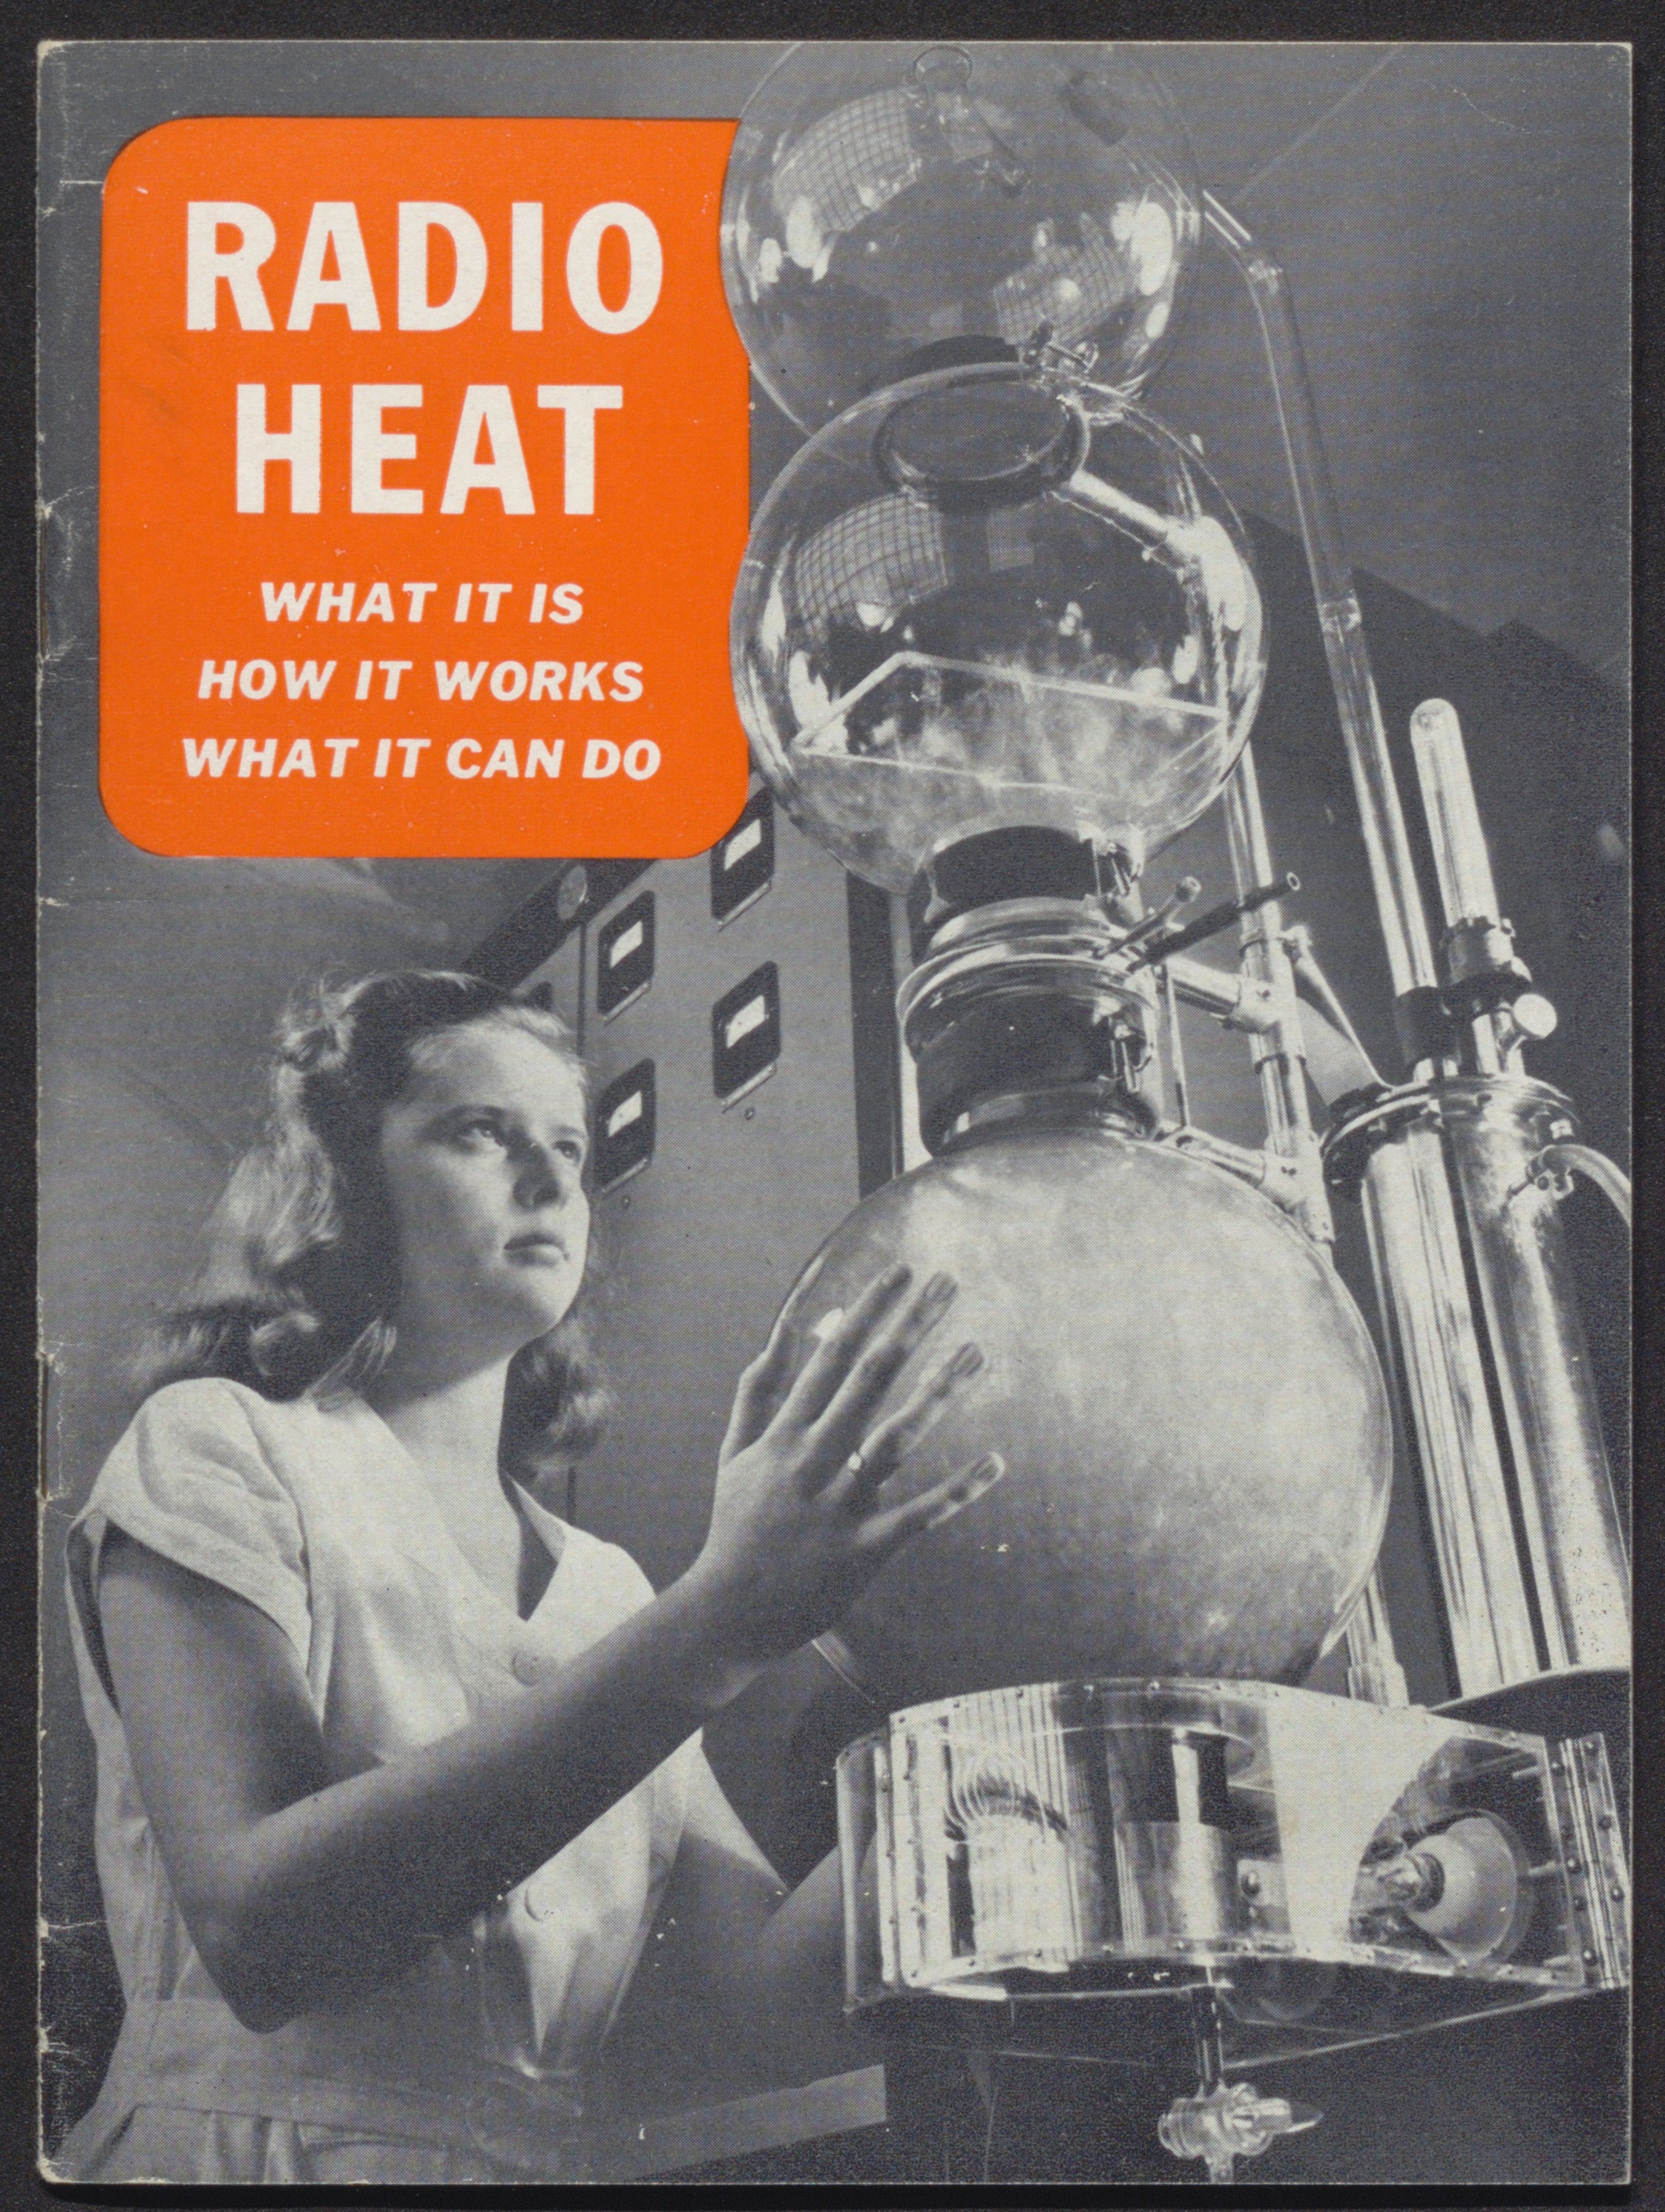 Pamphlet titled "Radio Heat" showing a black and white photo of a girl touching a large scientific apparatus.